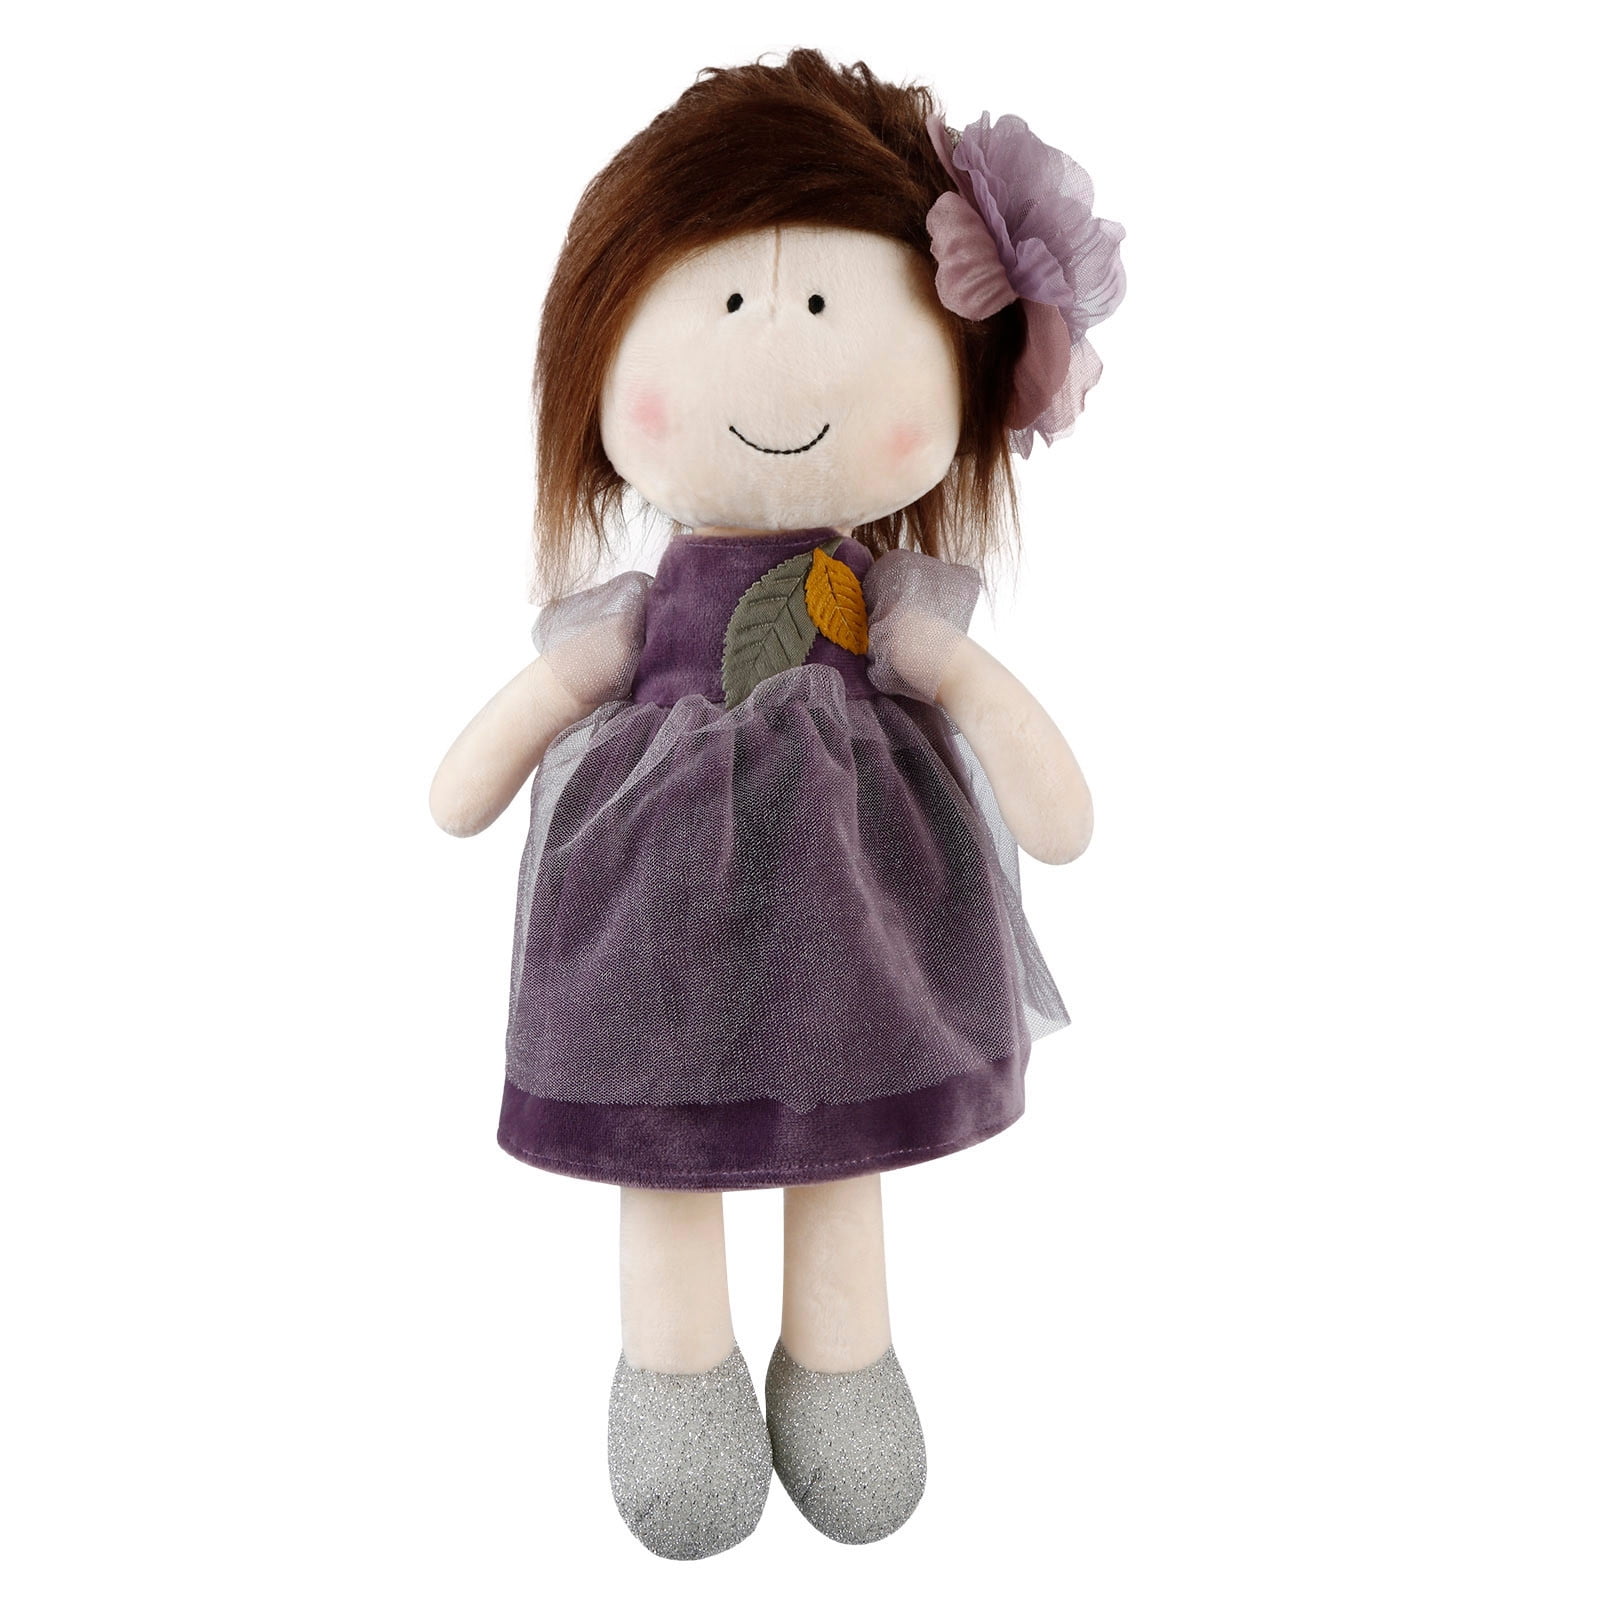 Handmade doll for decorating your house